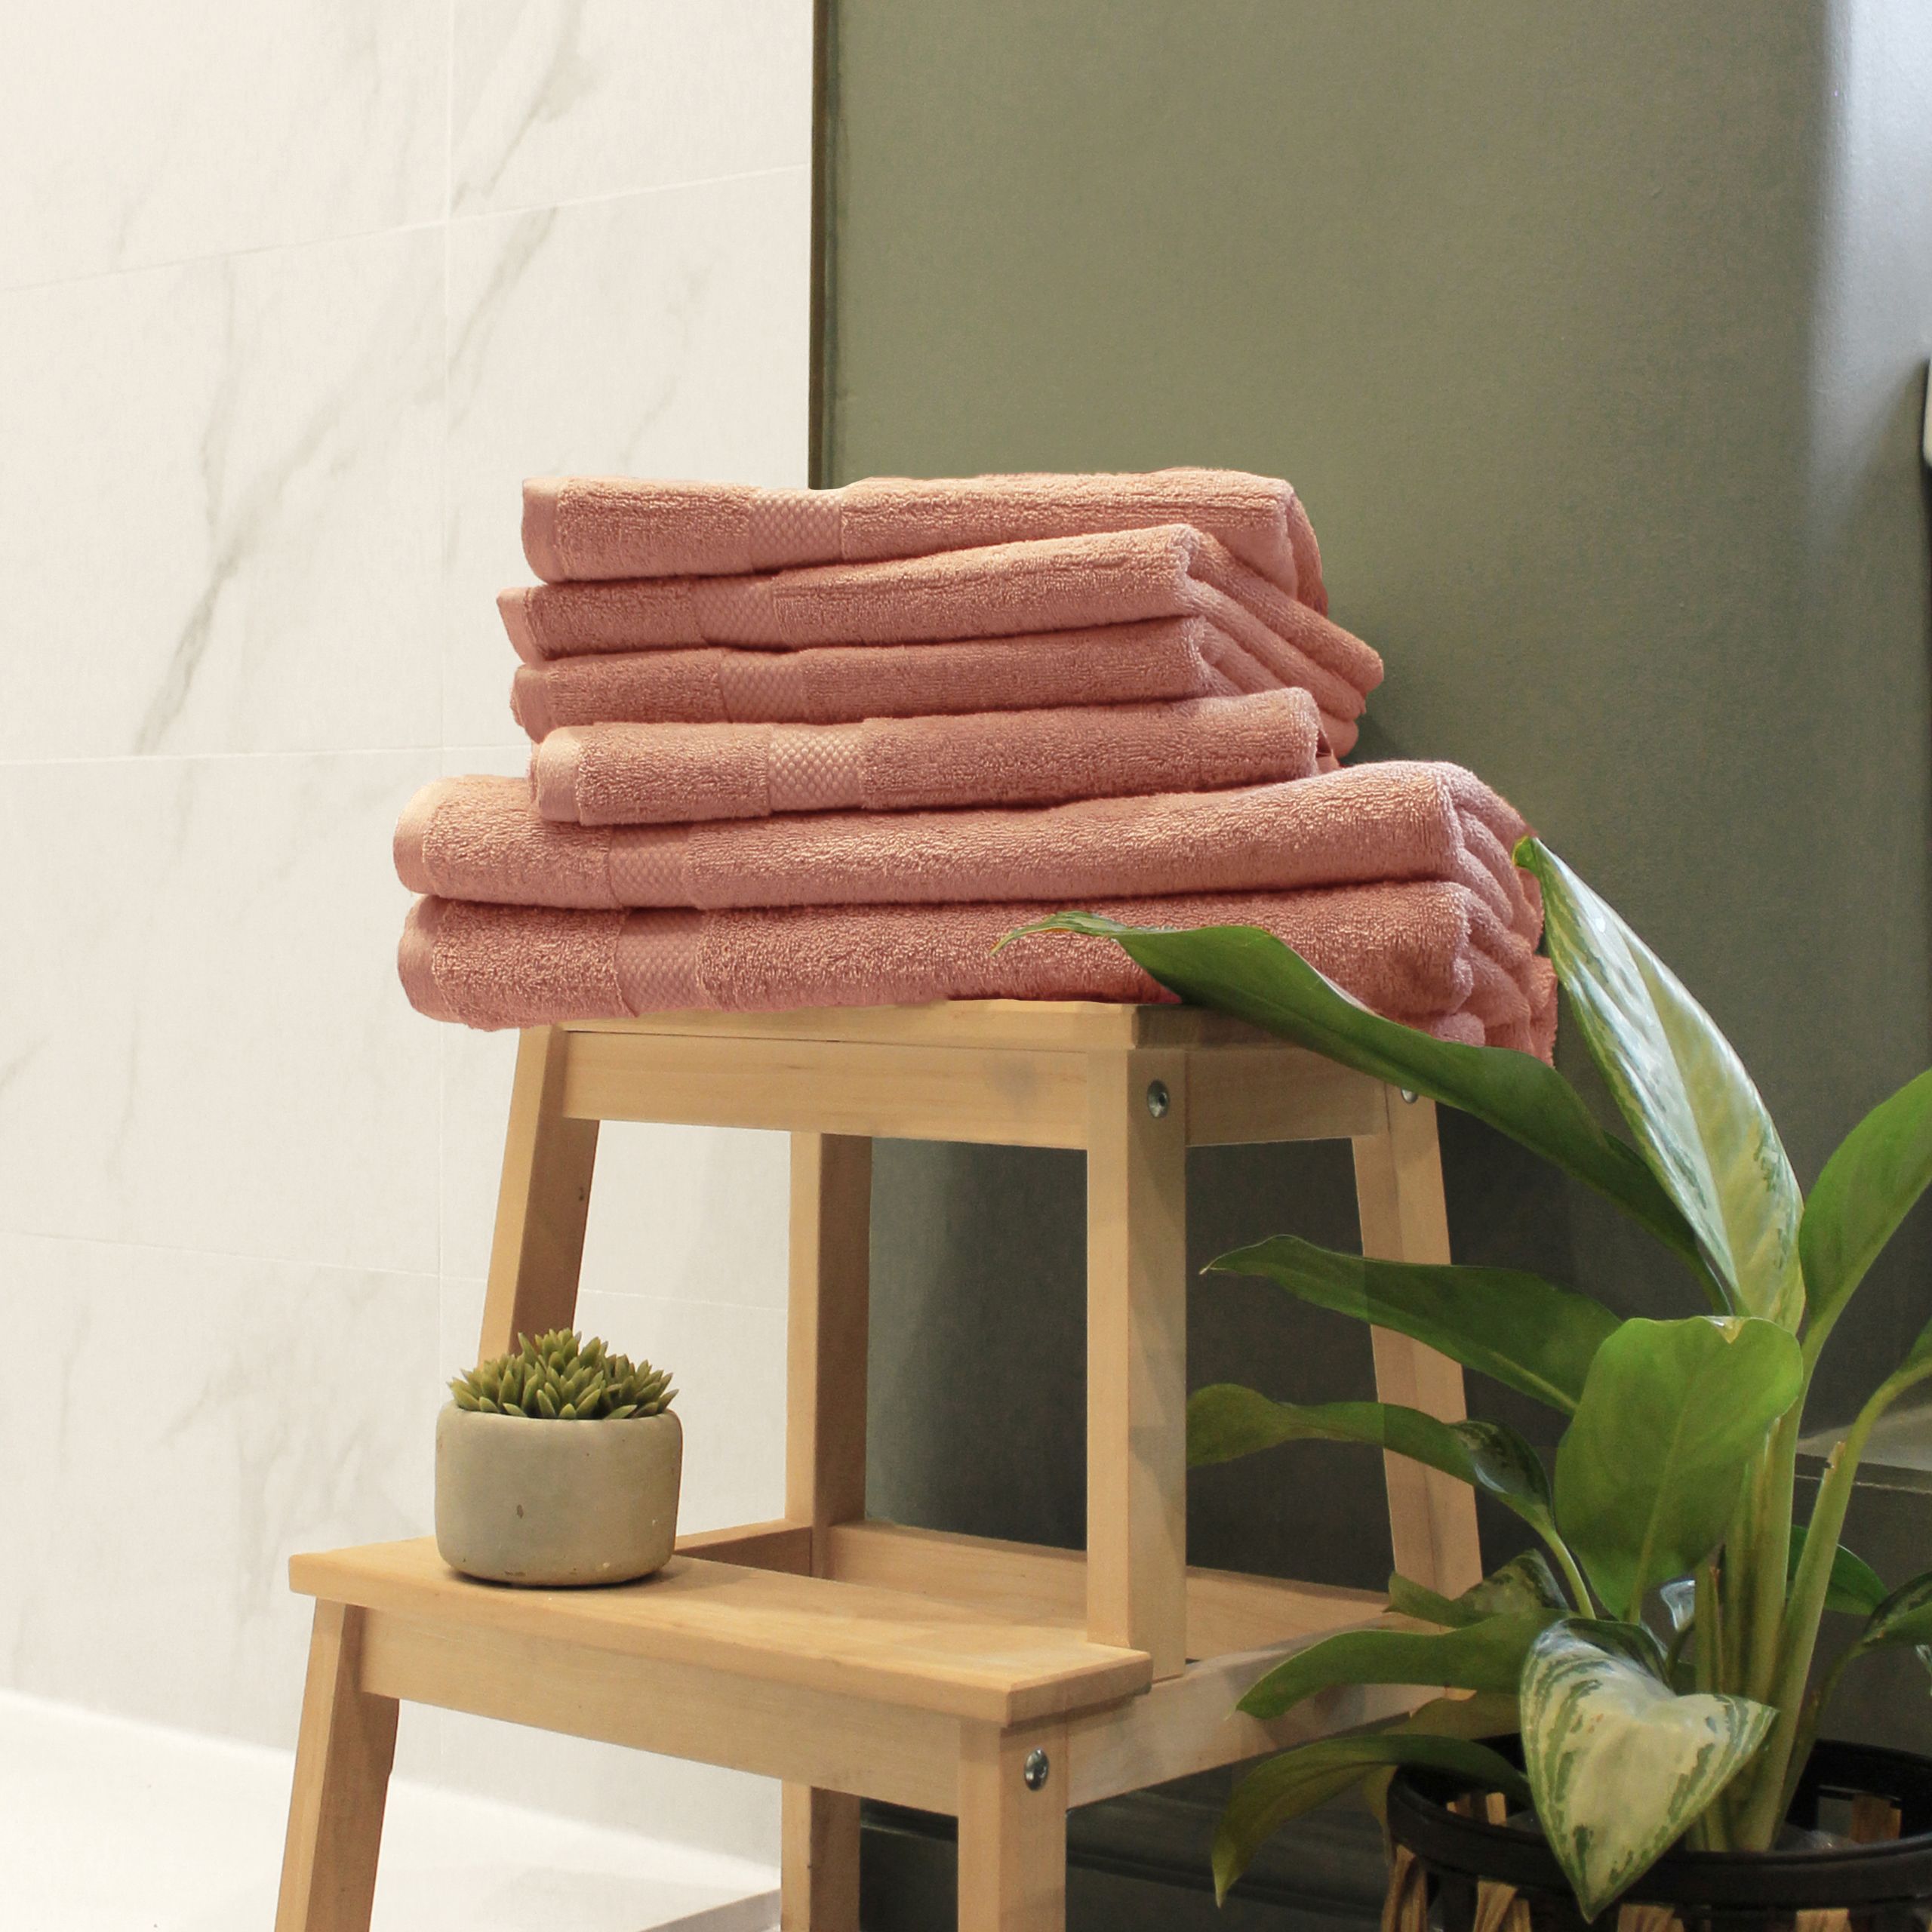 The Linen Yard LOFT 6-piece towel bale gives you a spa-like feeling at home. They are designed to be super absorbent and ultra-soft. Made from a 100% plush combed cotton for a relaxed everyday feel. Perfect heavyweight towels with 650 grams per square metre. The basket weave band is a quality design feature that gives LOFT towels a stylish effortless signature look. In multiple soothing shades, create an air of calm in your washroom and always have super softness on hand.